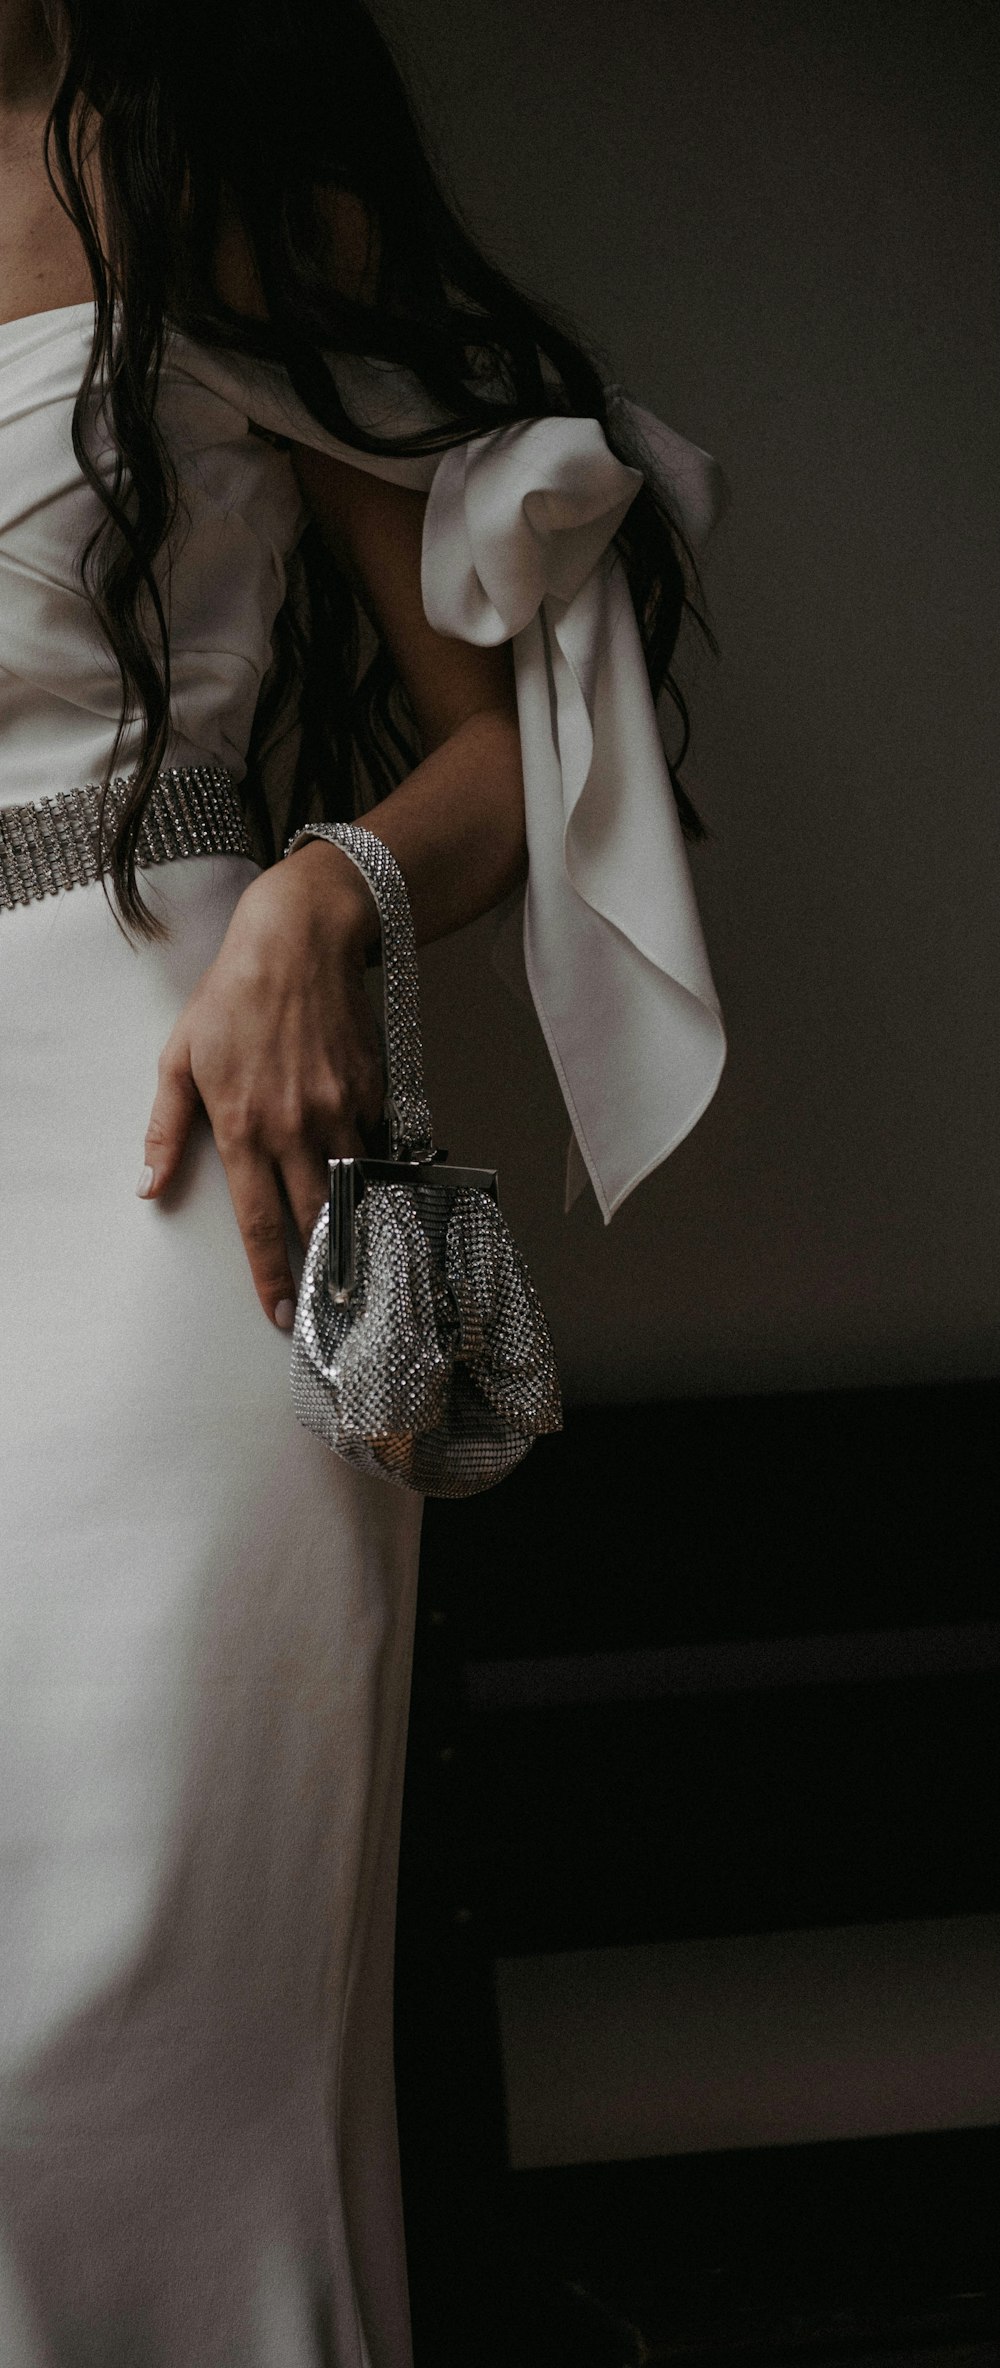 a woman in a white dress holding a purse